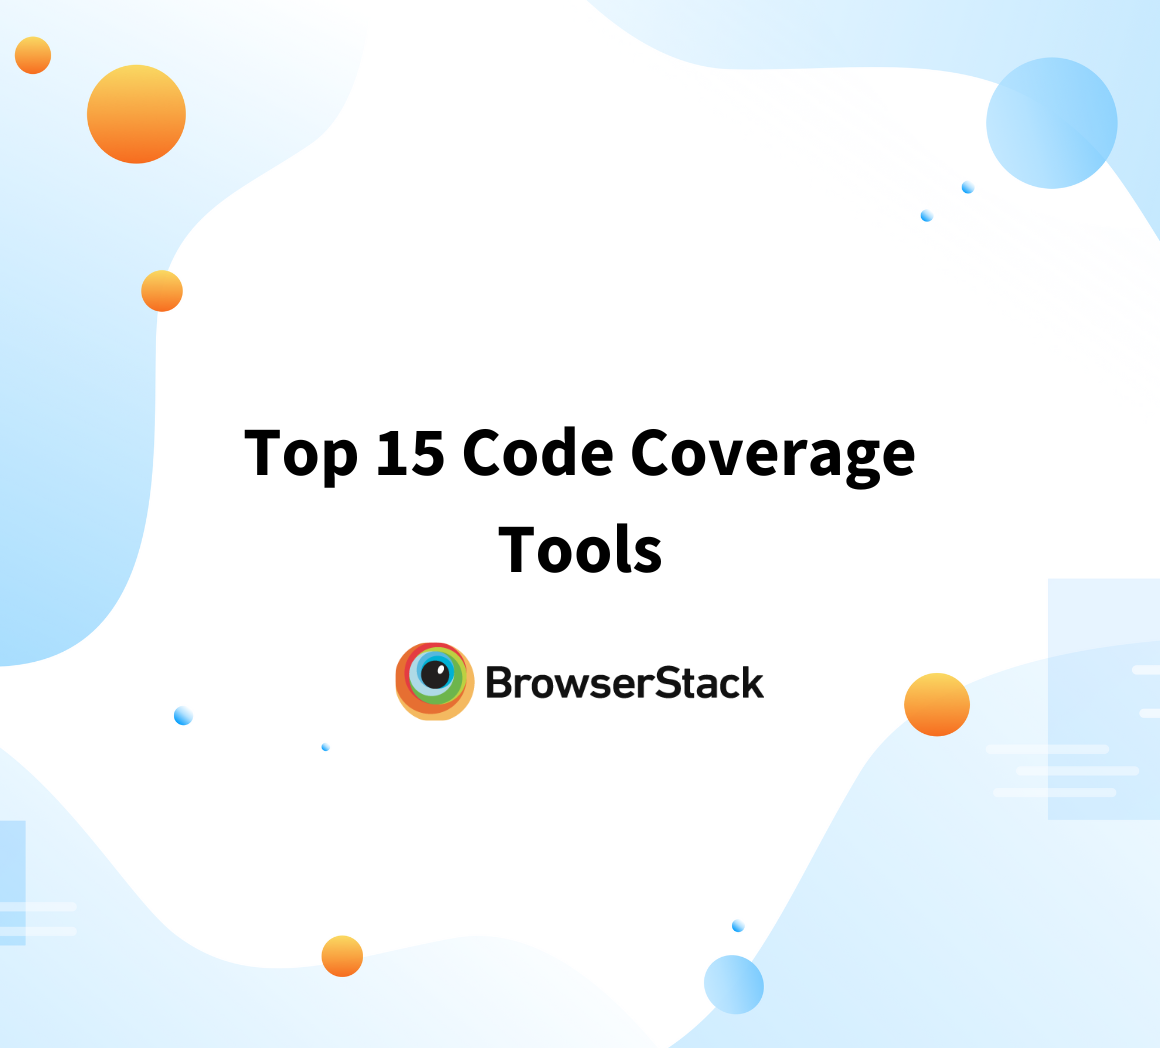 Top 15 Code Coverage Tools